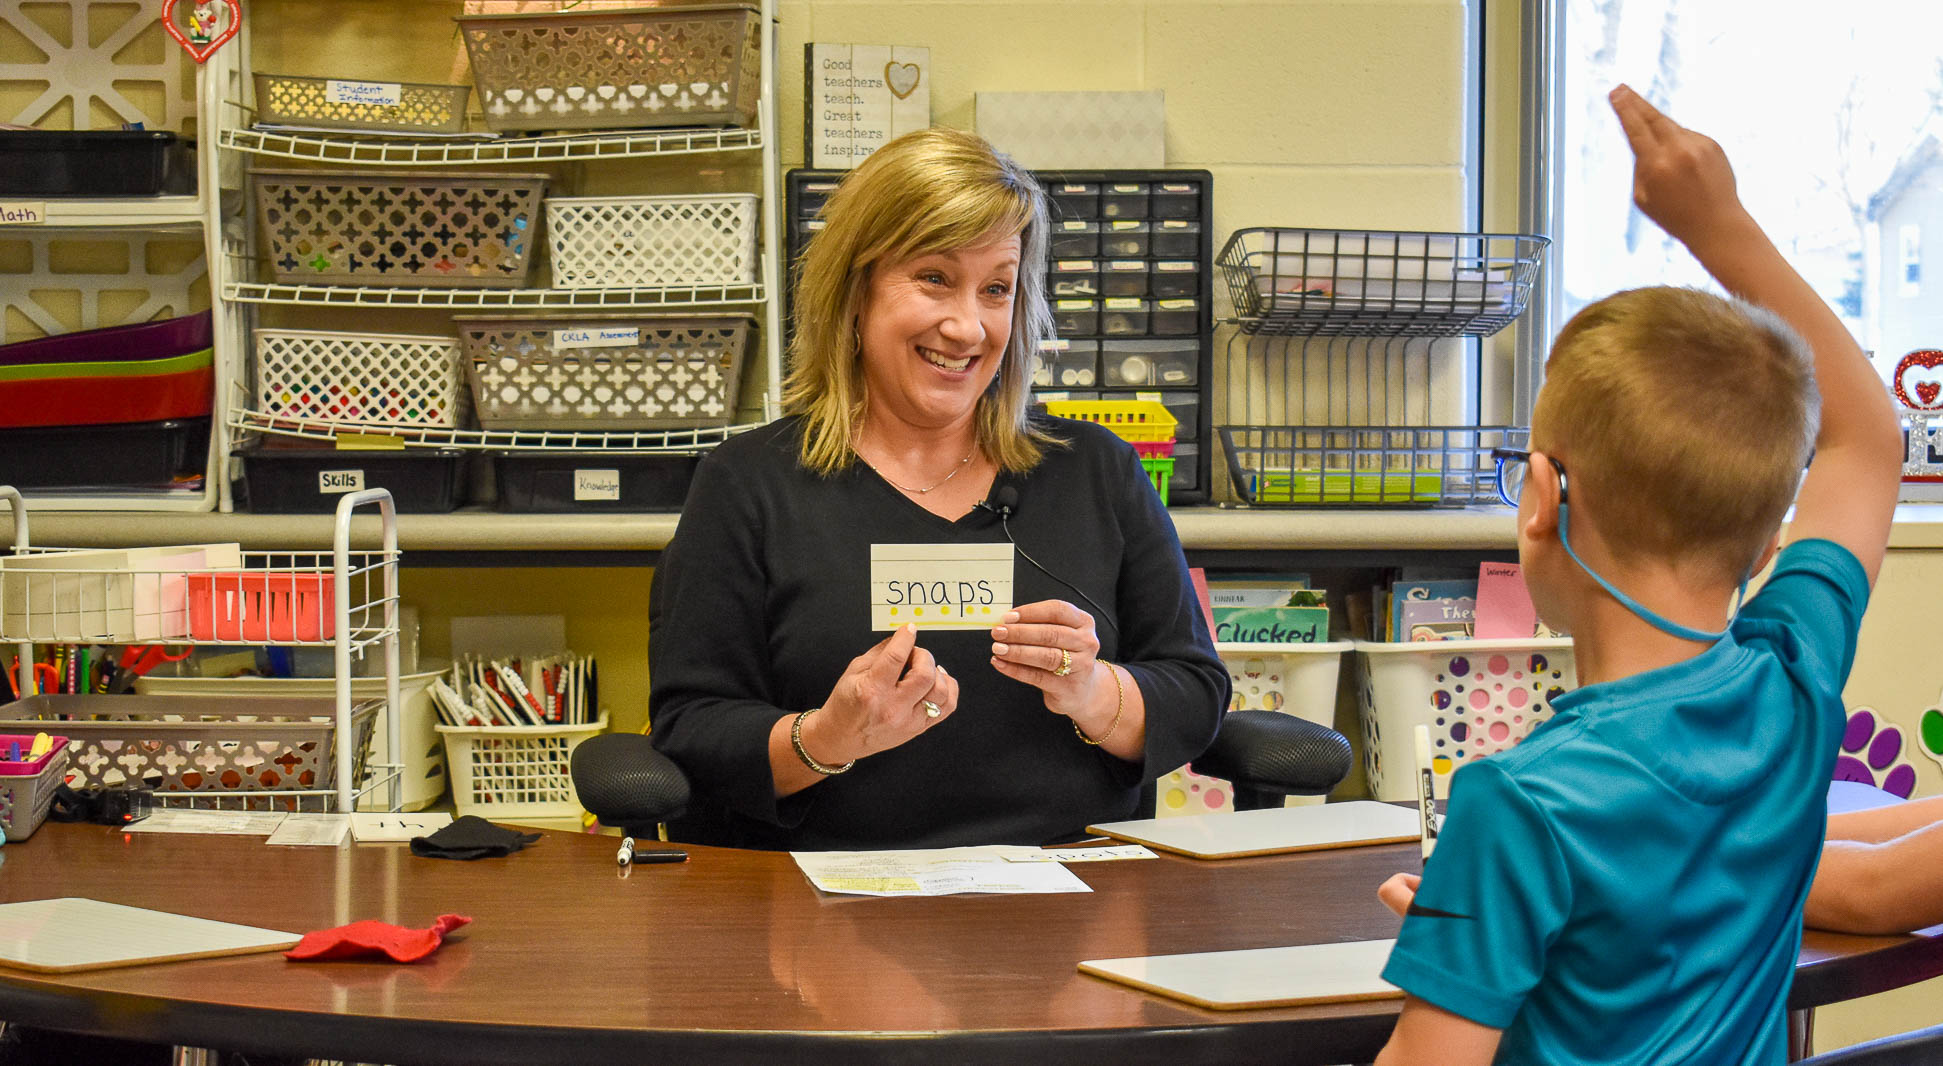 Tara Rabenberg, a teacher with shoulder-length blond hair and bangs, holds up an index card reading "snaps." She points at one of the letters and smiles at a young studnet in a blue shirt, who is sitting across from her and raising his hand.